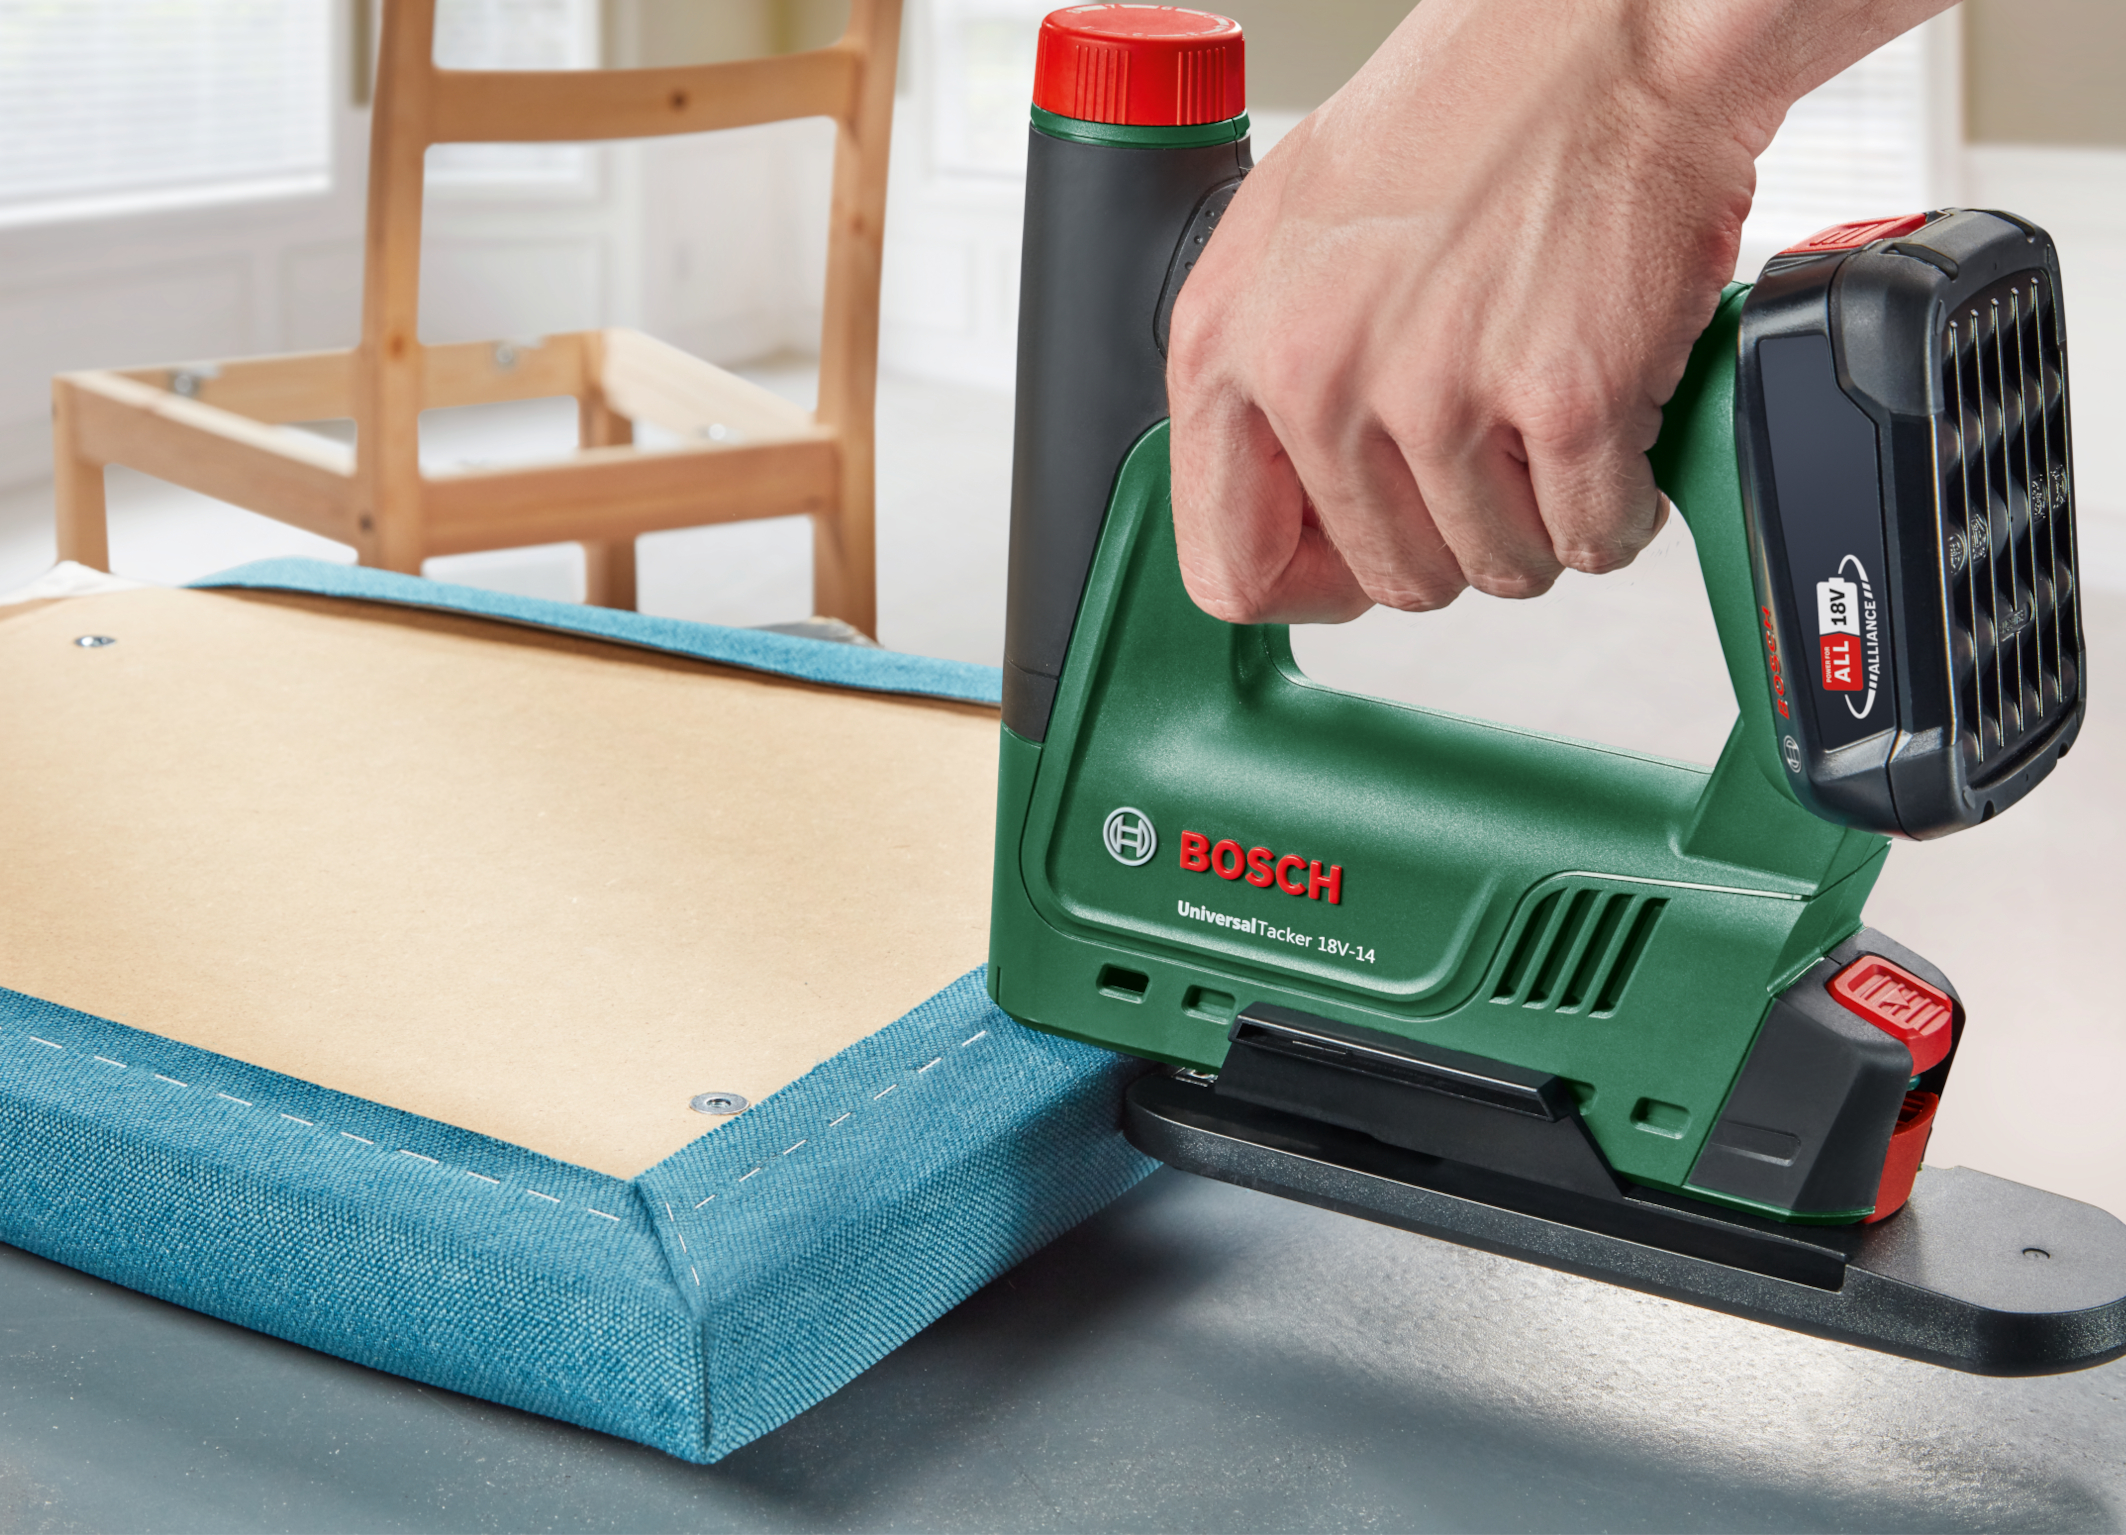 Powerful addition to the '18V Power for All System': First 18V cordless tacker from Bosch DIYers - Bosch Media Service